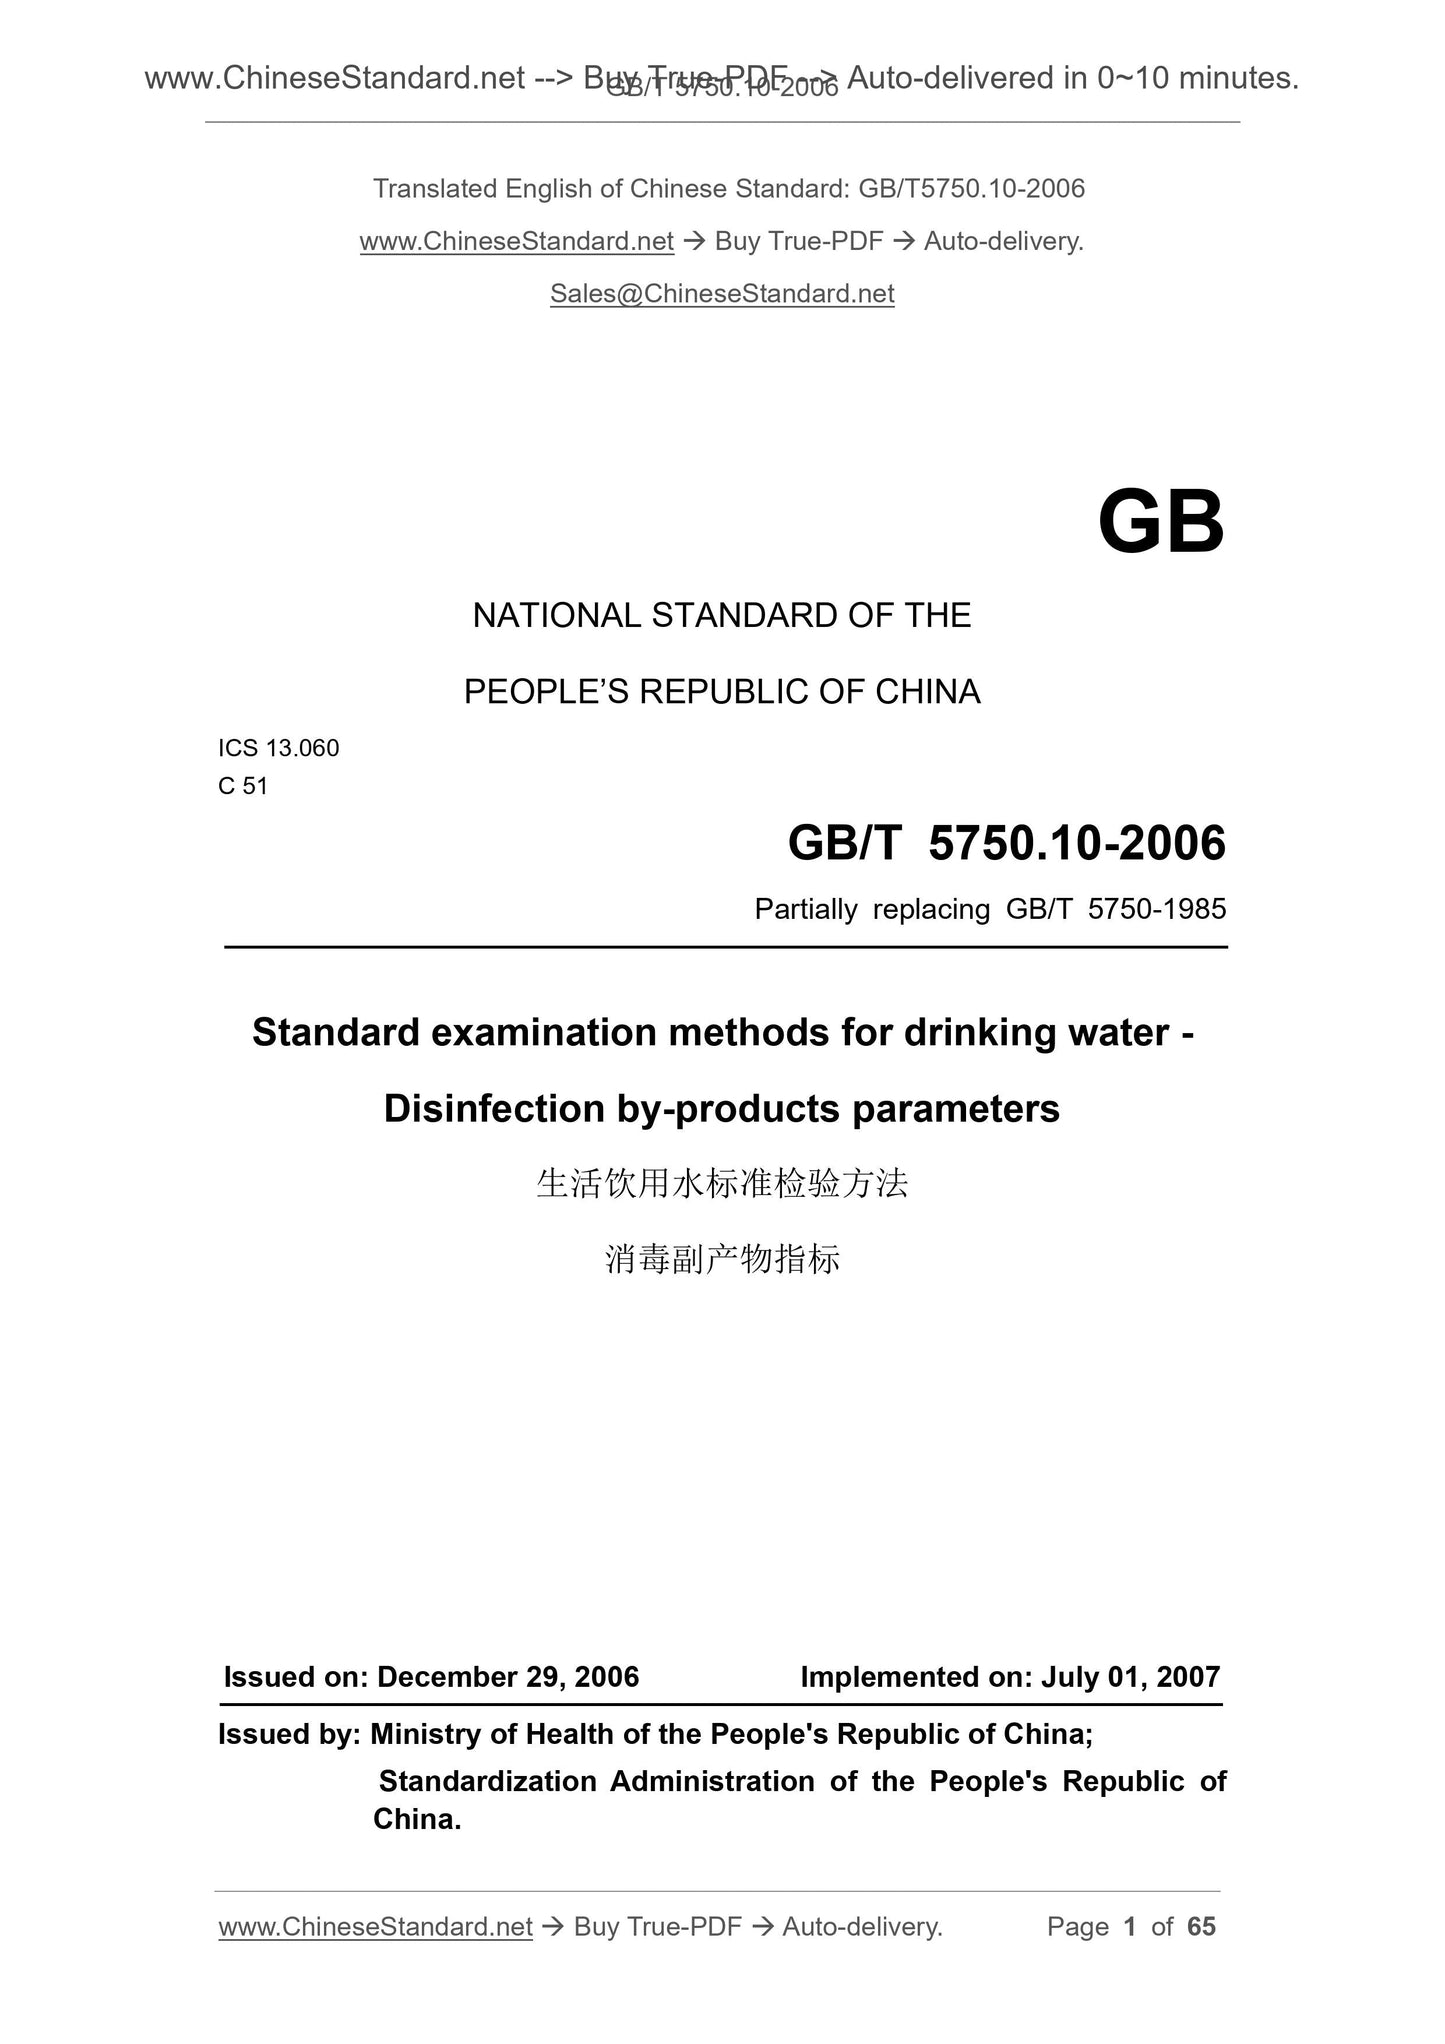 GB/T 5750.10-2006 Page 1